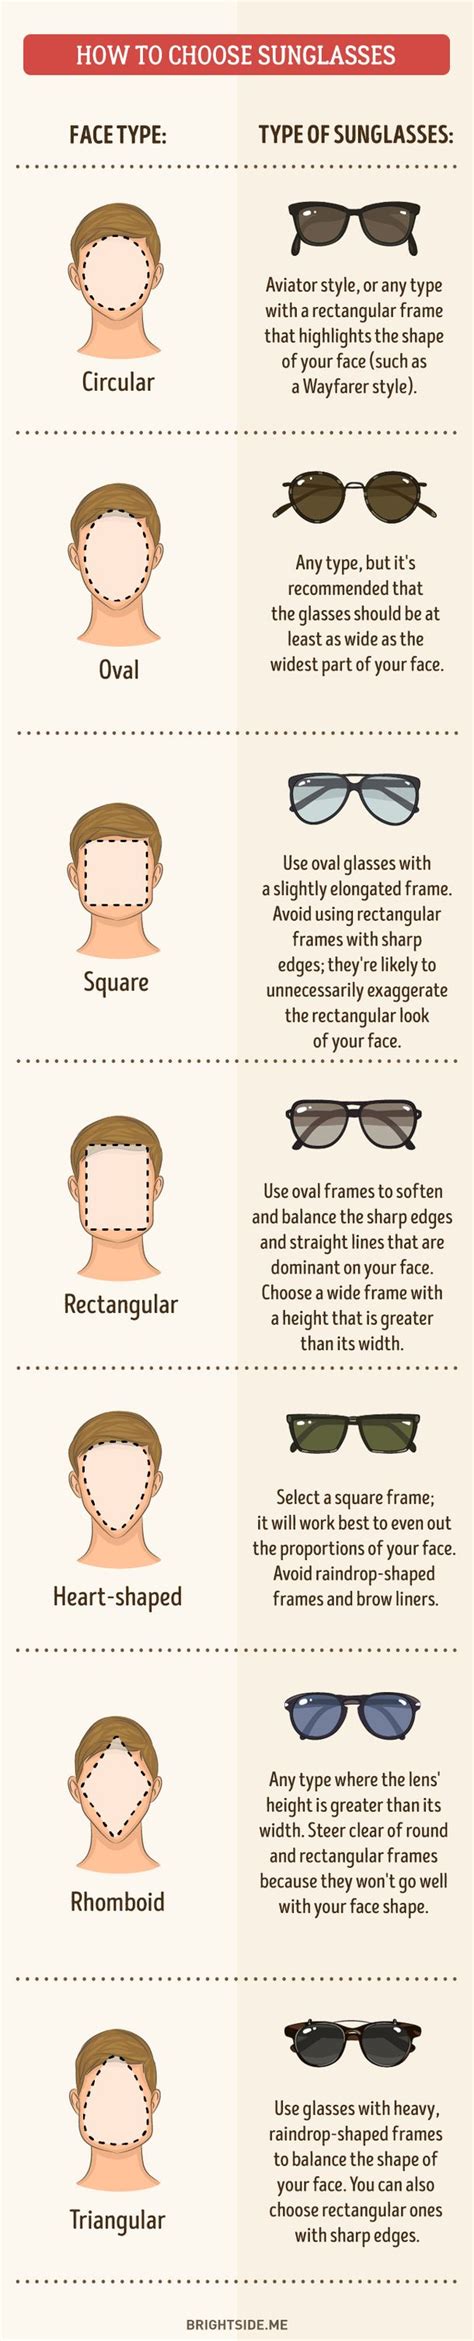 How To Chose Sunglasses Based On Your Face Type Fashion Sunglasses